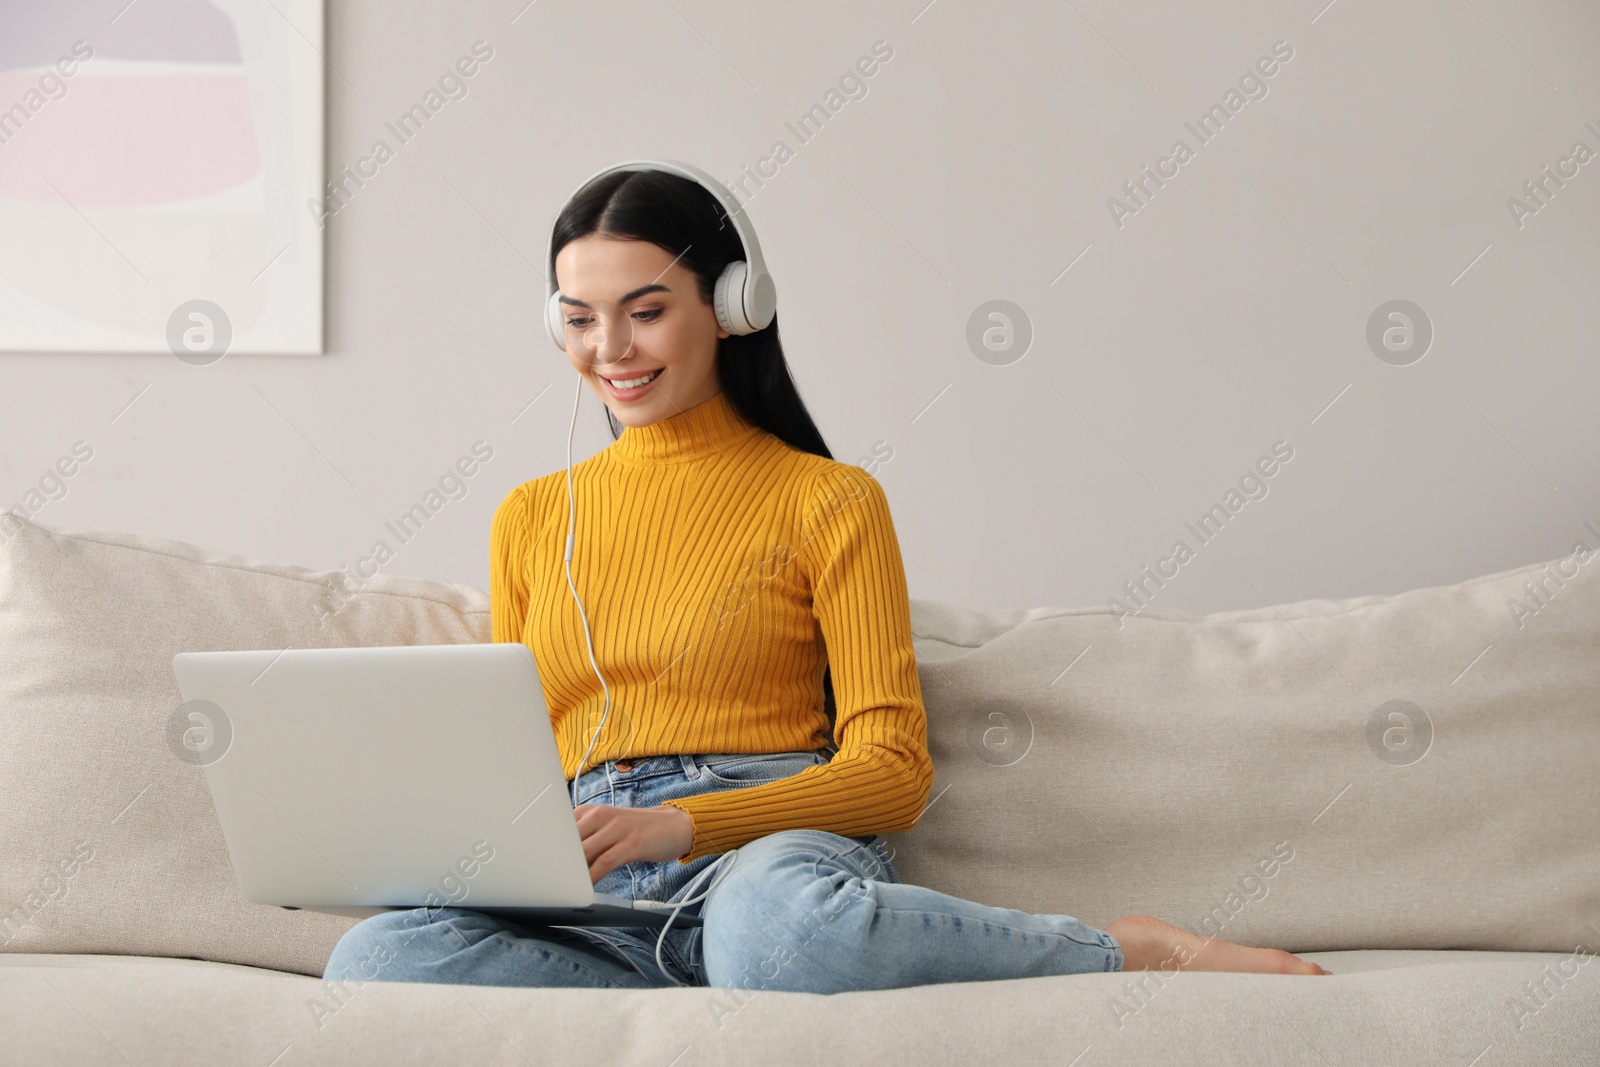 Photo of Woman with laptop and headphones sitting on sofa at home